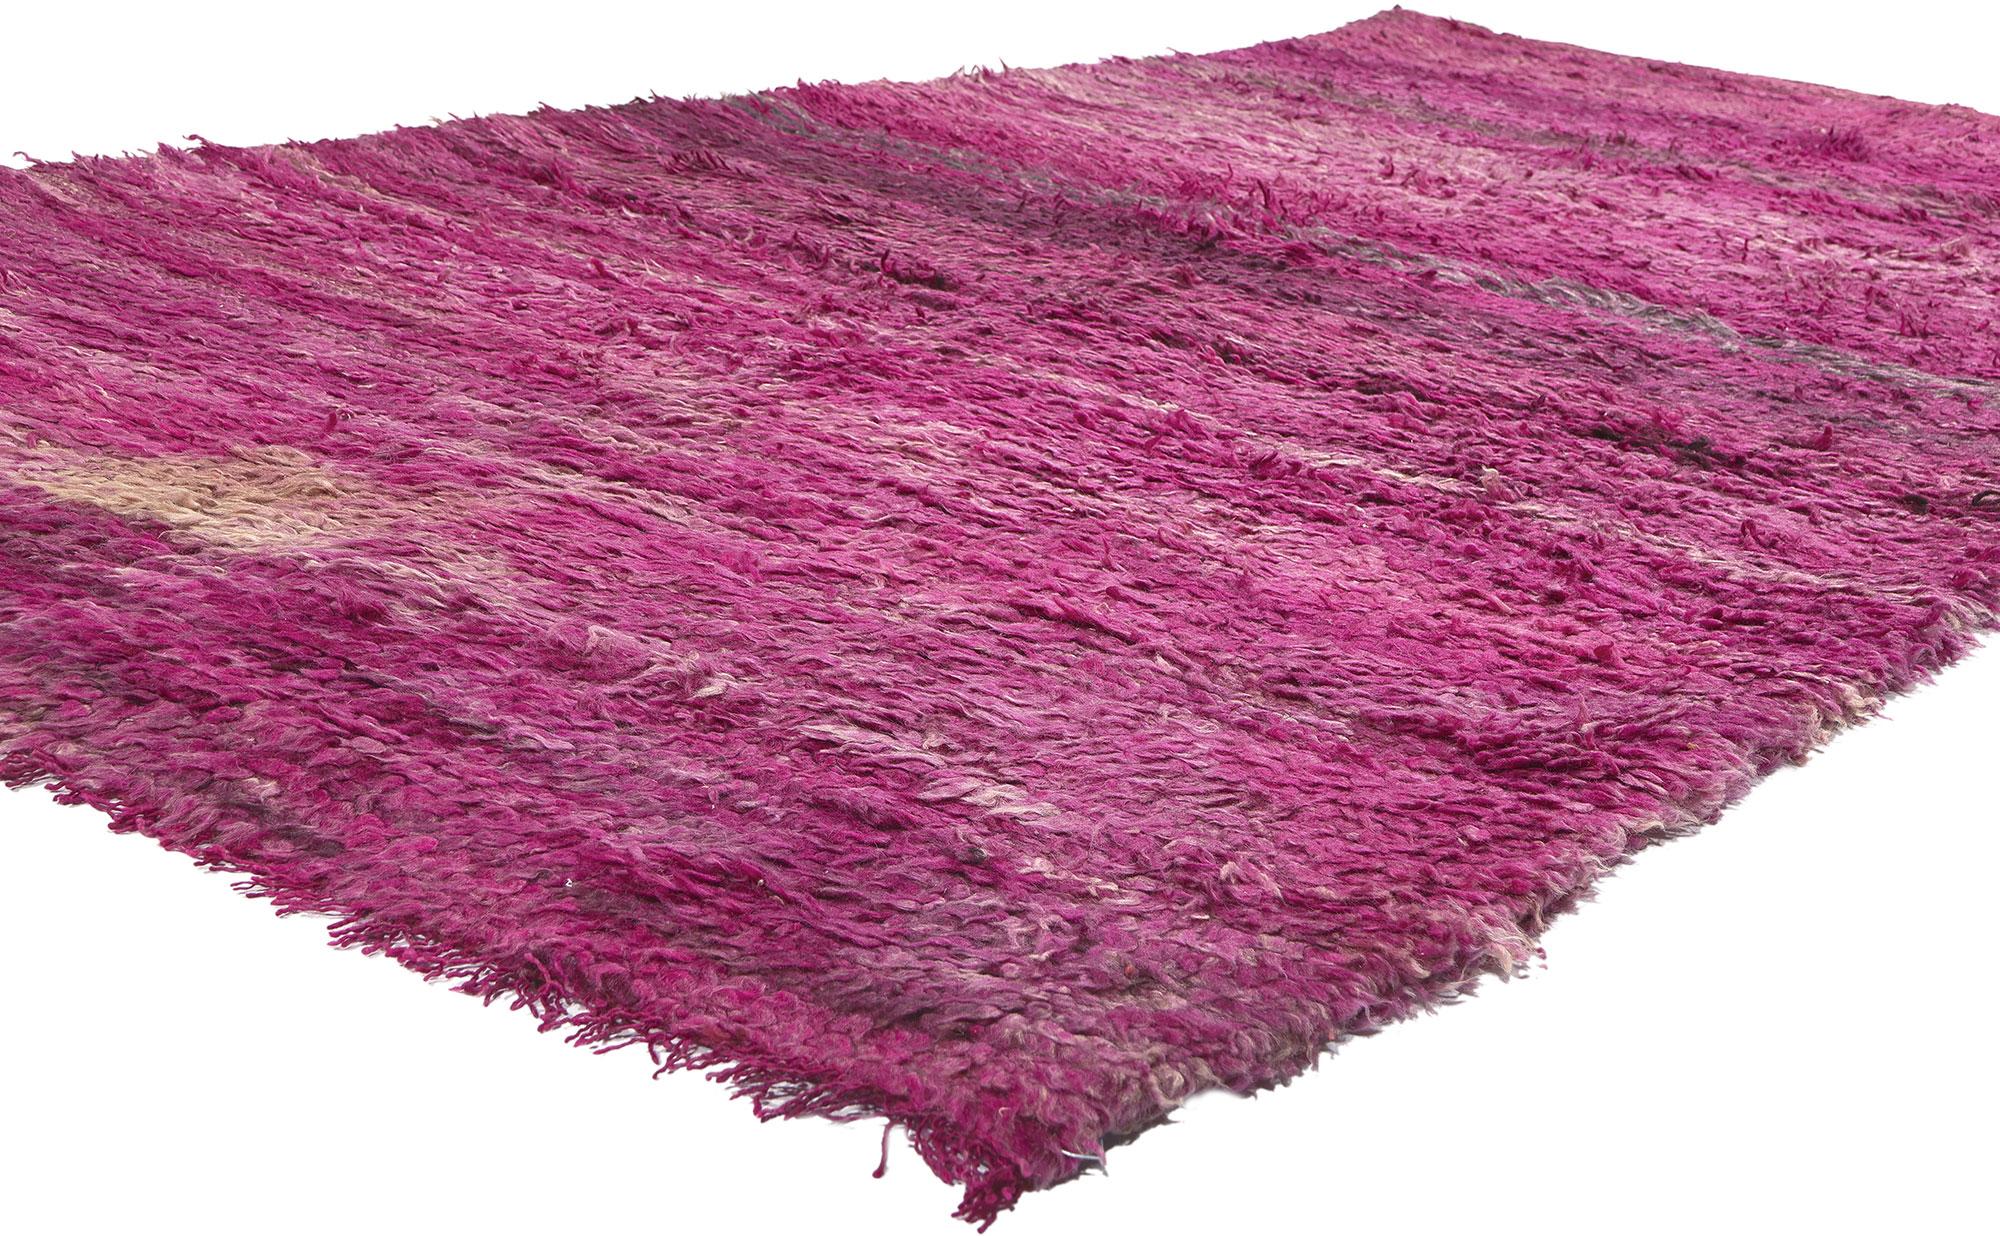 20698 Reversible Vintage Beni MGuild Moroccan Rug, 05'03 x 10'03. 
Step into the embrace of a cozy nomad mingling with the delightful magenta hues of raspberry sorbet in this hand-knotted wool vintage Beni MGuild Moroccan rug. Allow yourself to be